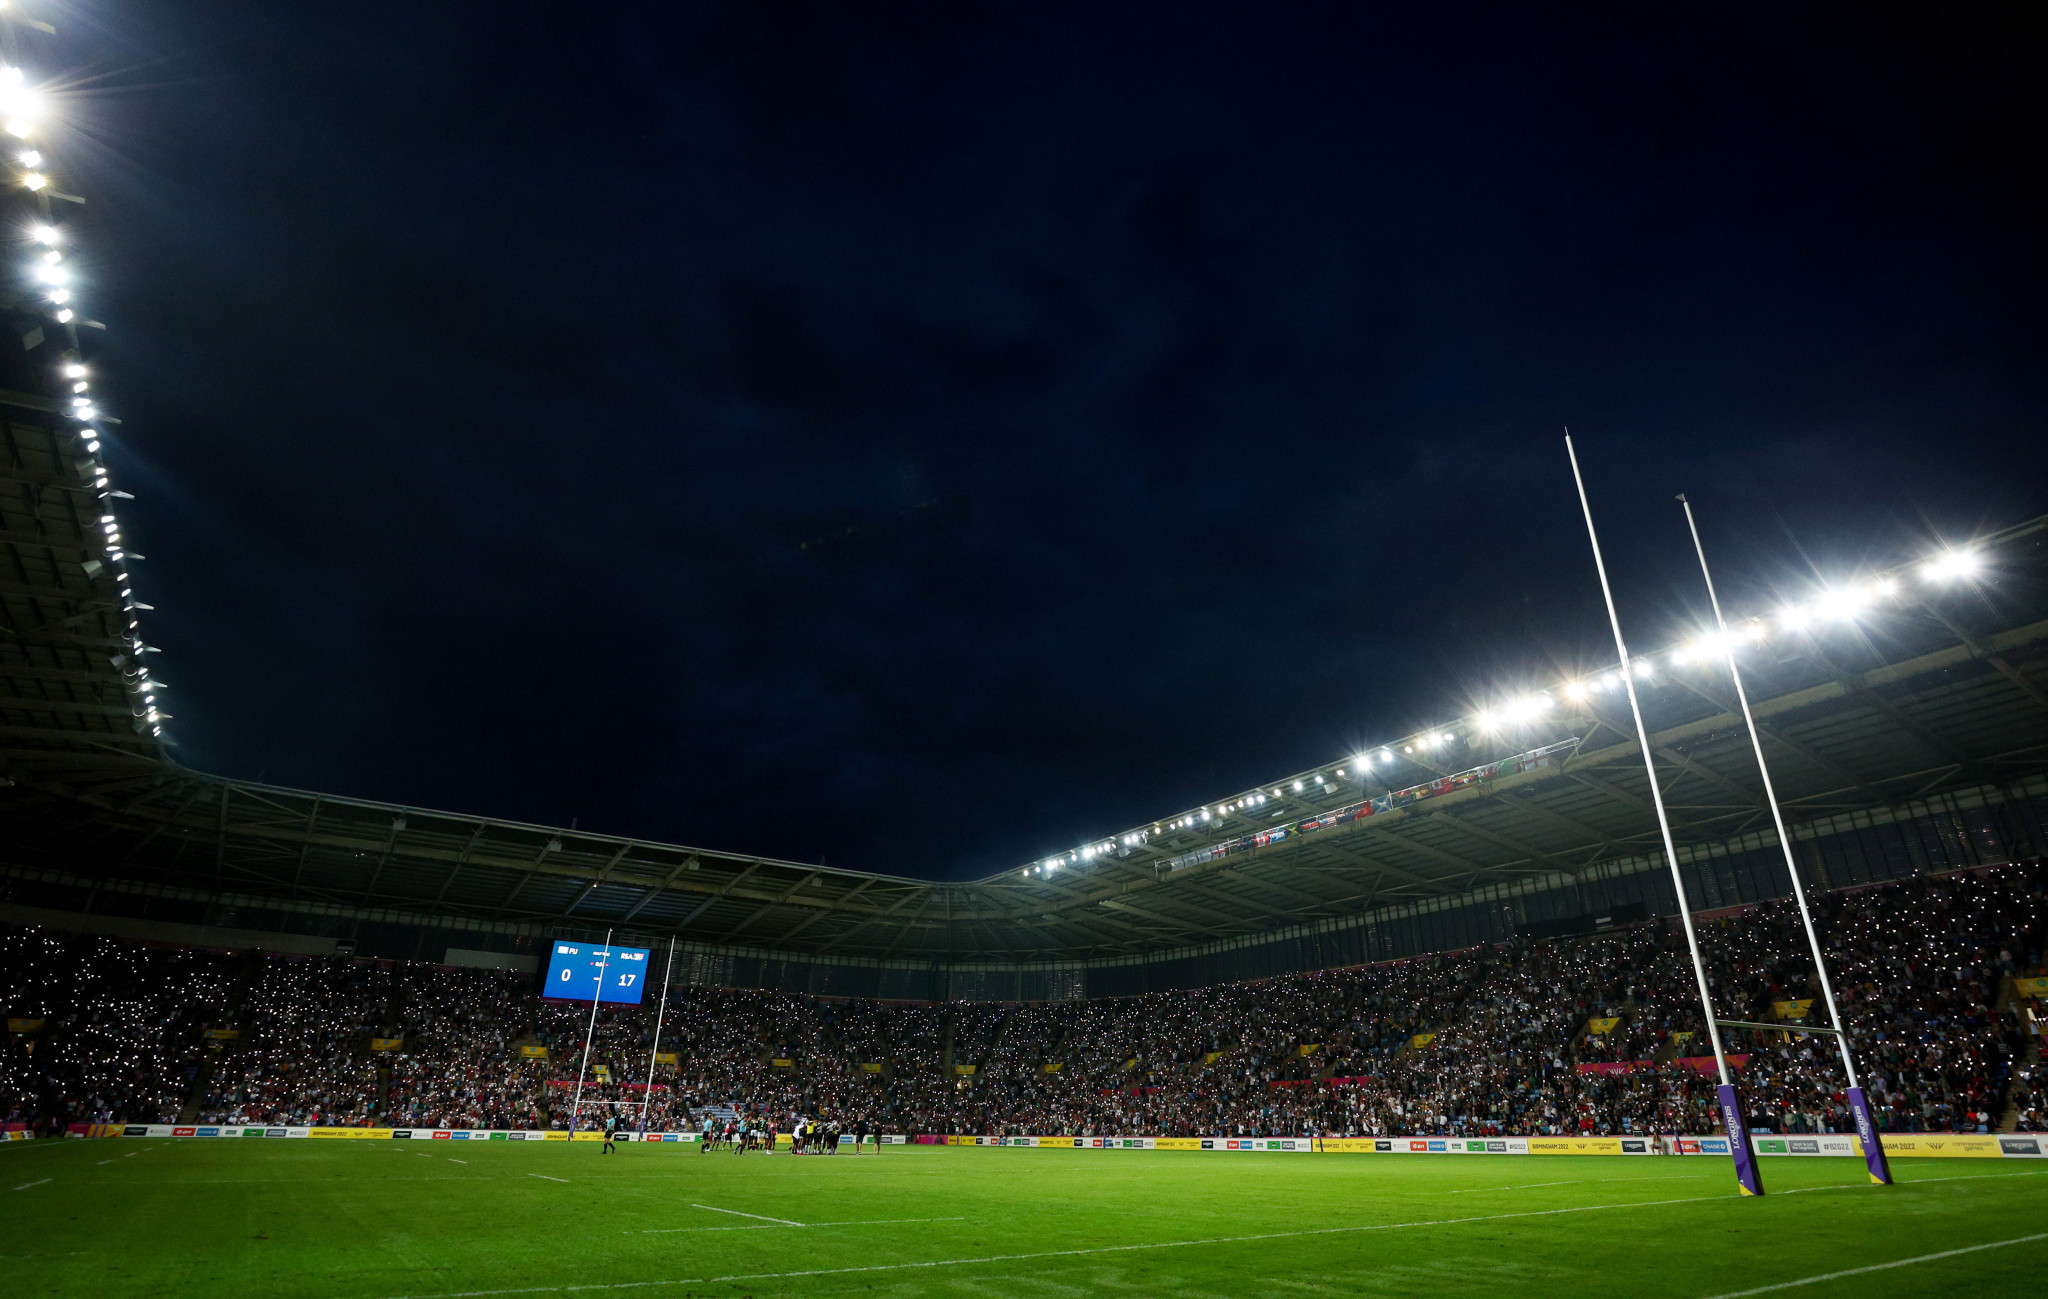 Coventry City match postponed due to "unsafe pitch" after Birmingham 2022 rugby sevens